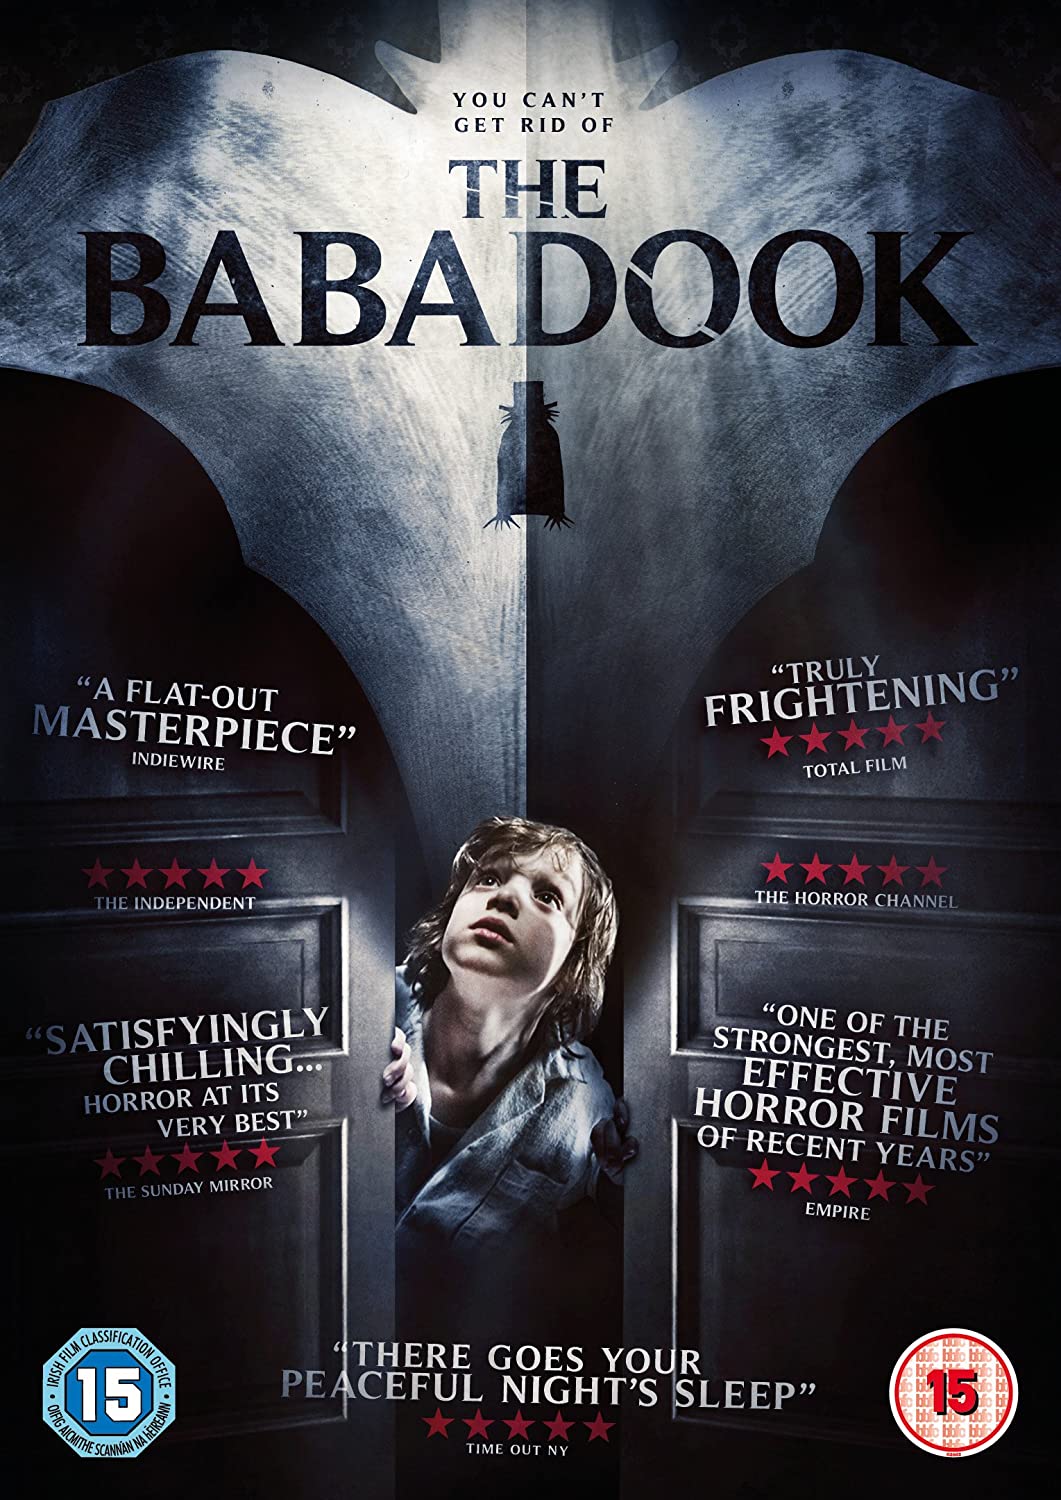 The Babadook - Horror/Thriller [DVD]